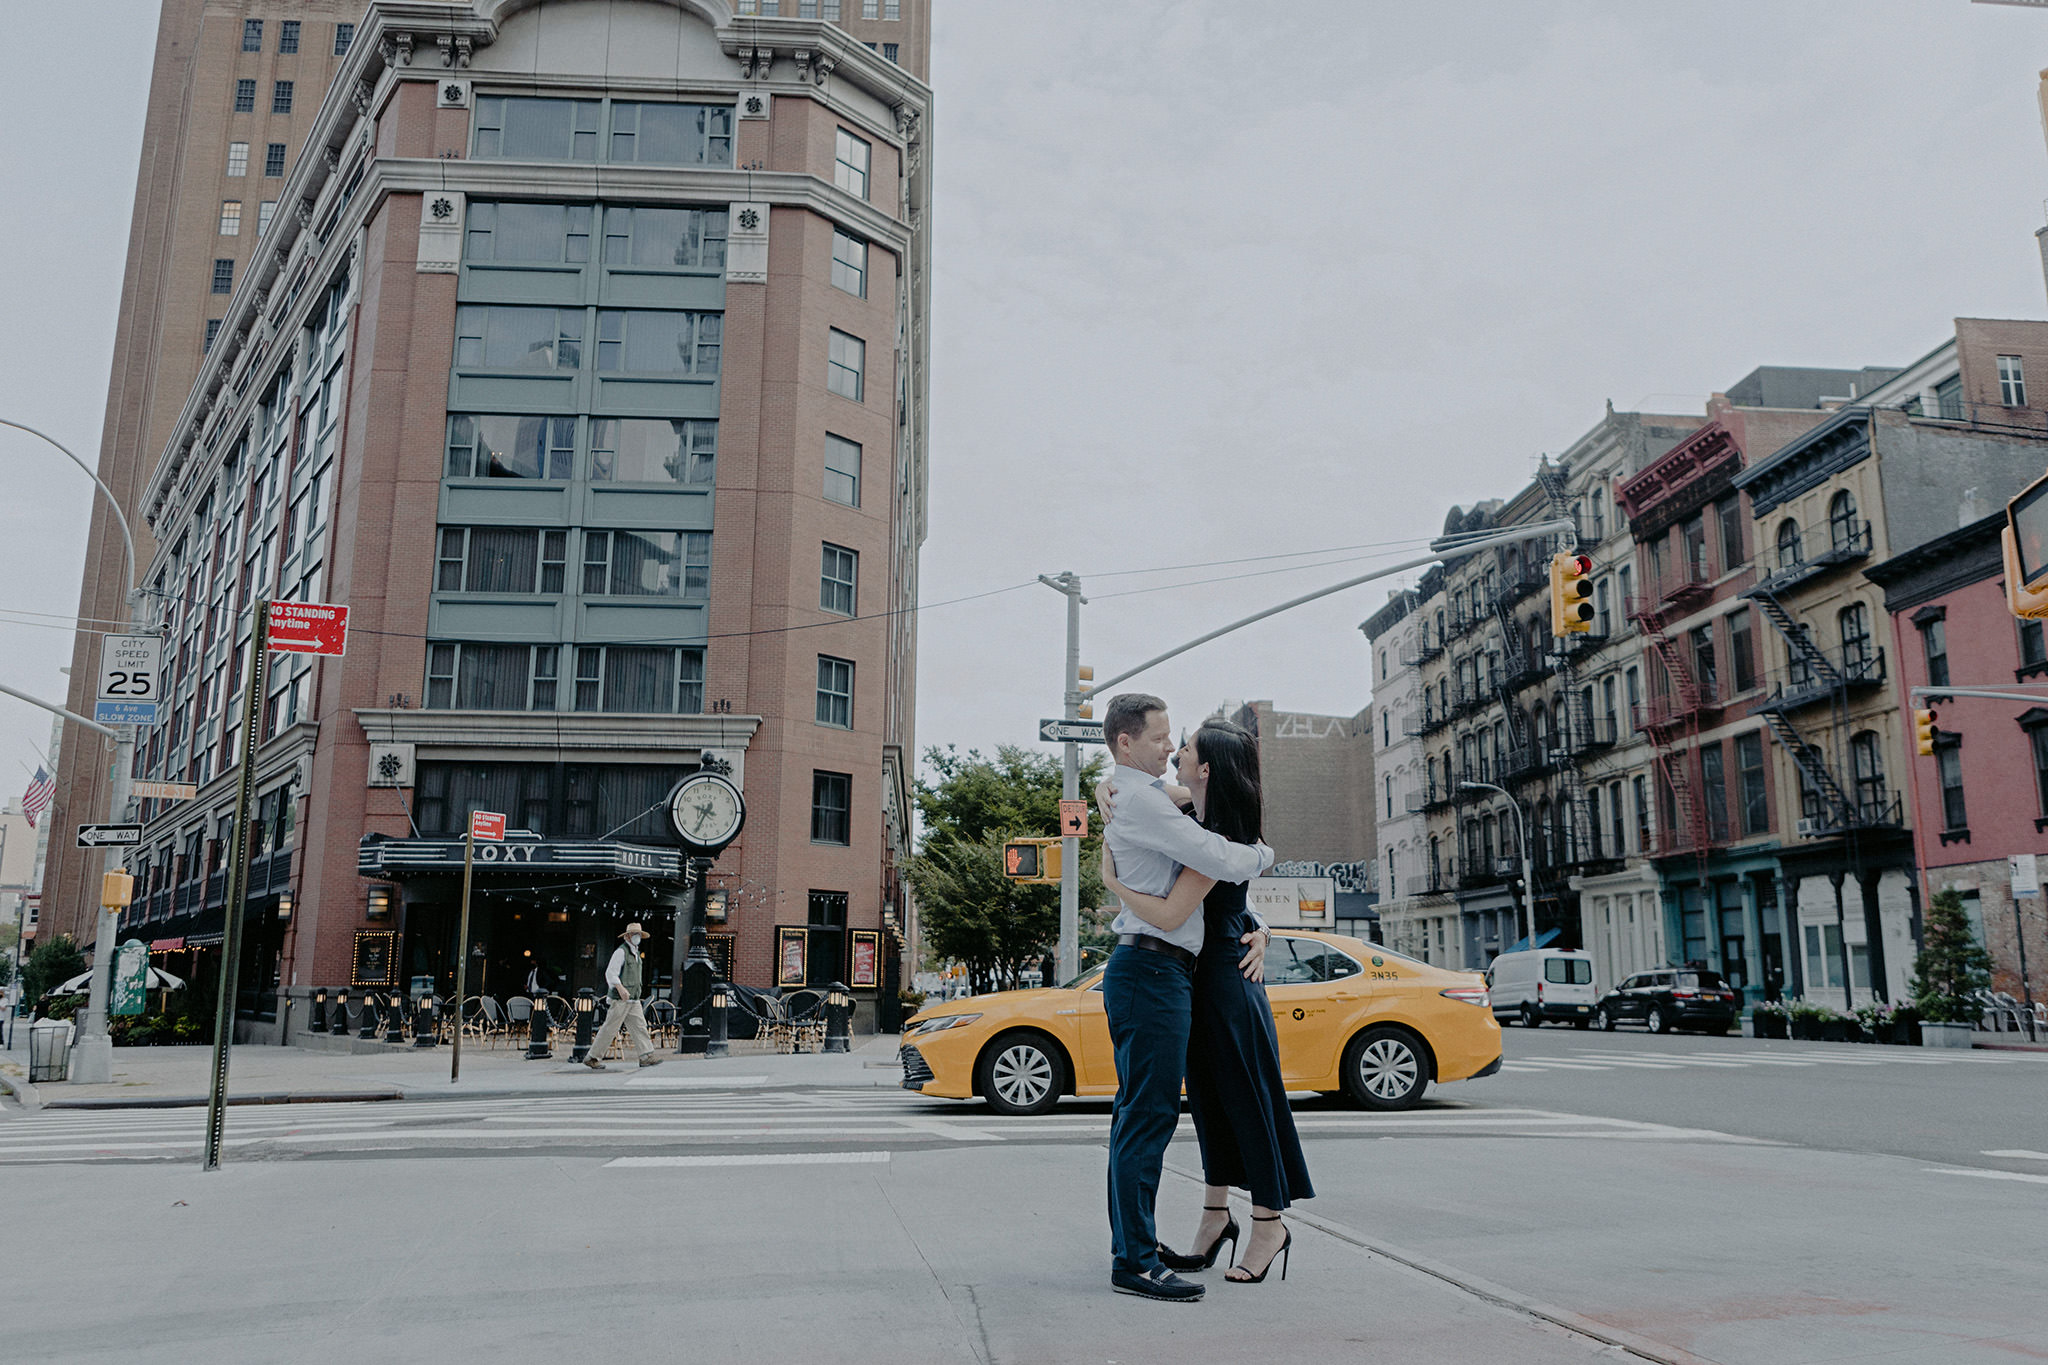 The engaged couple is hugging each other in New York City, with a yellow cab ad buildings in the background. Editorial image by Jenny Fu Studio